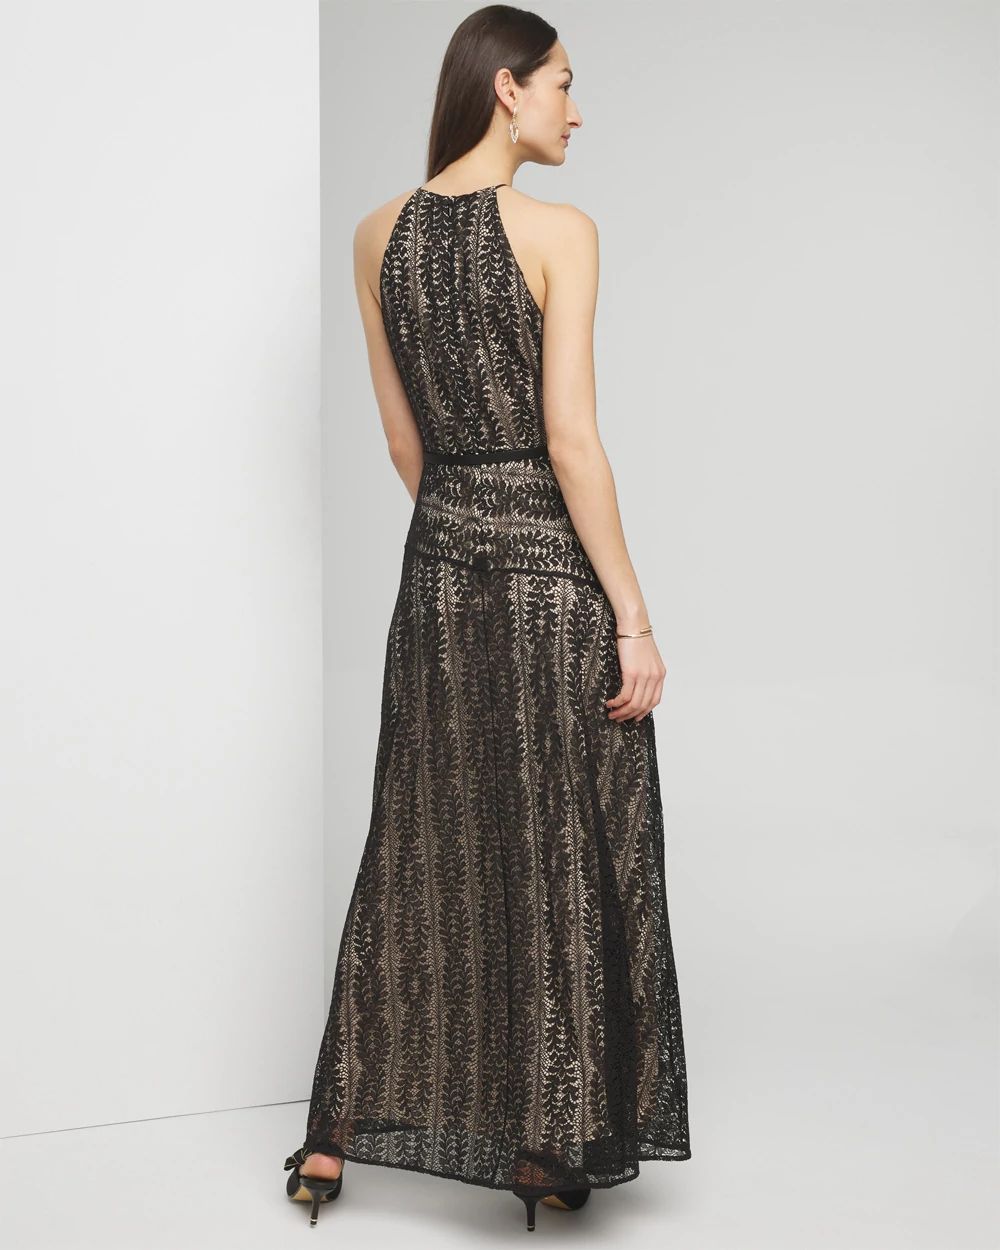 Petite Sleeveless Halter Lace Maxi Dress click to view larger image.